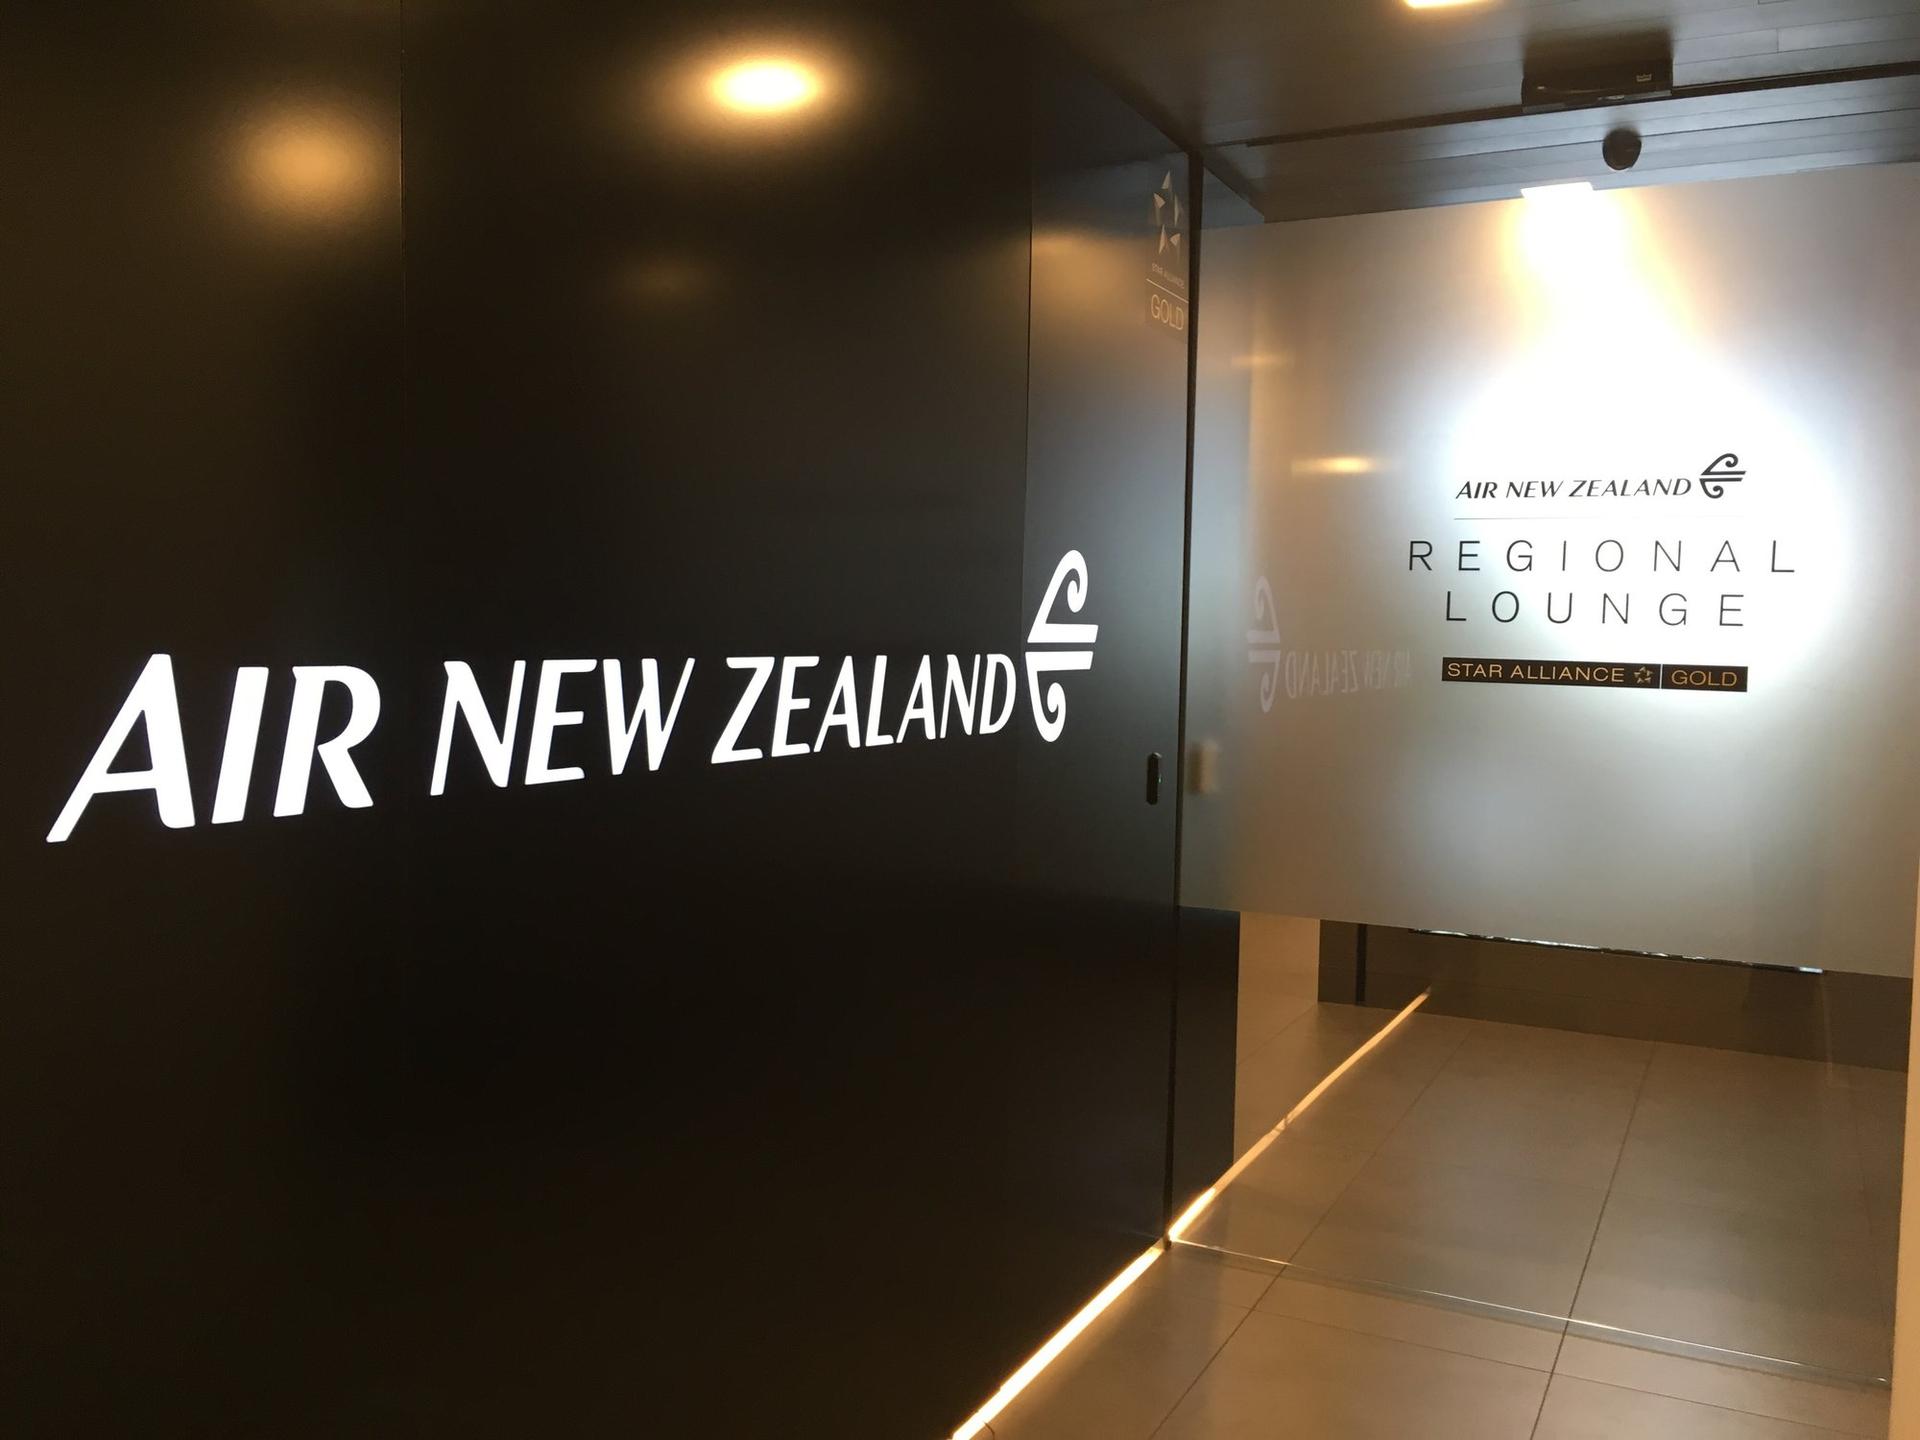 Air New Zealand Regional Lounge image 1 of 7